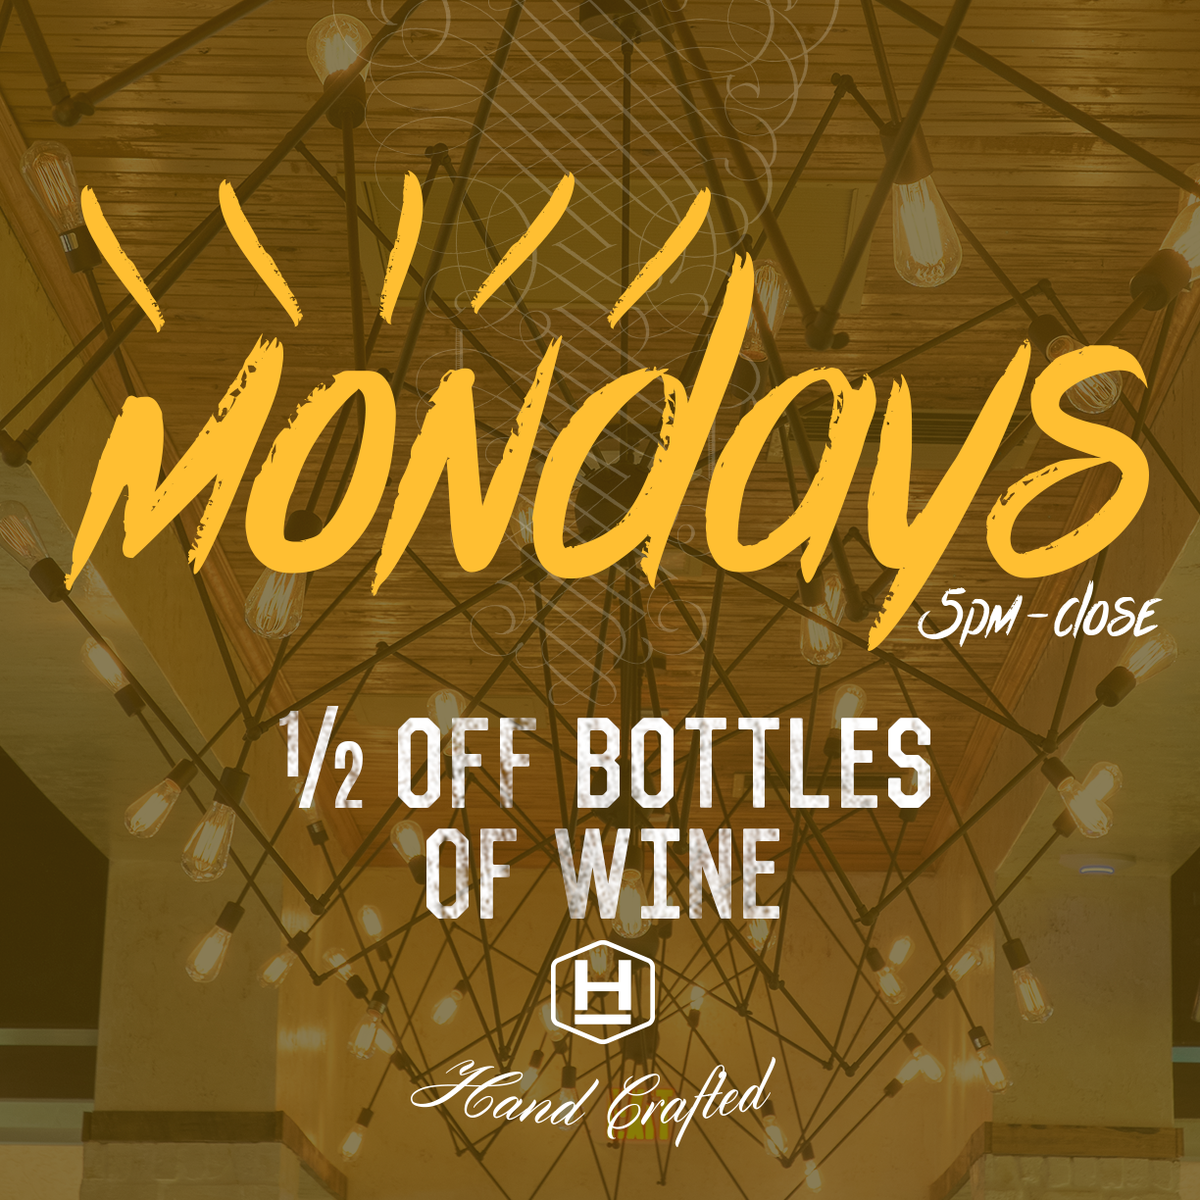 Mondays are meant for #wine at Hudson! Enjoy 1/2 off bottles of wine from 5 pm-close all summer long. #HudsonSocial